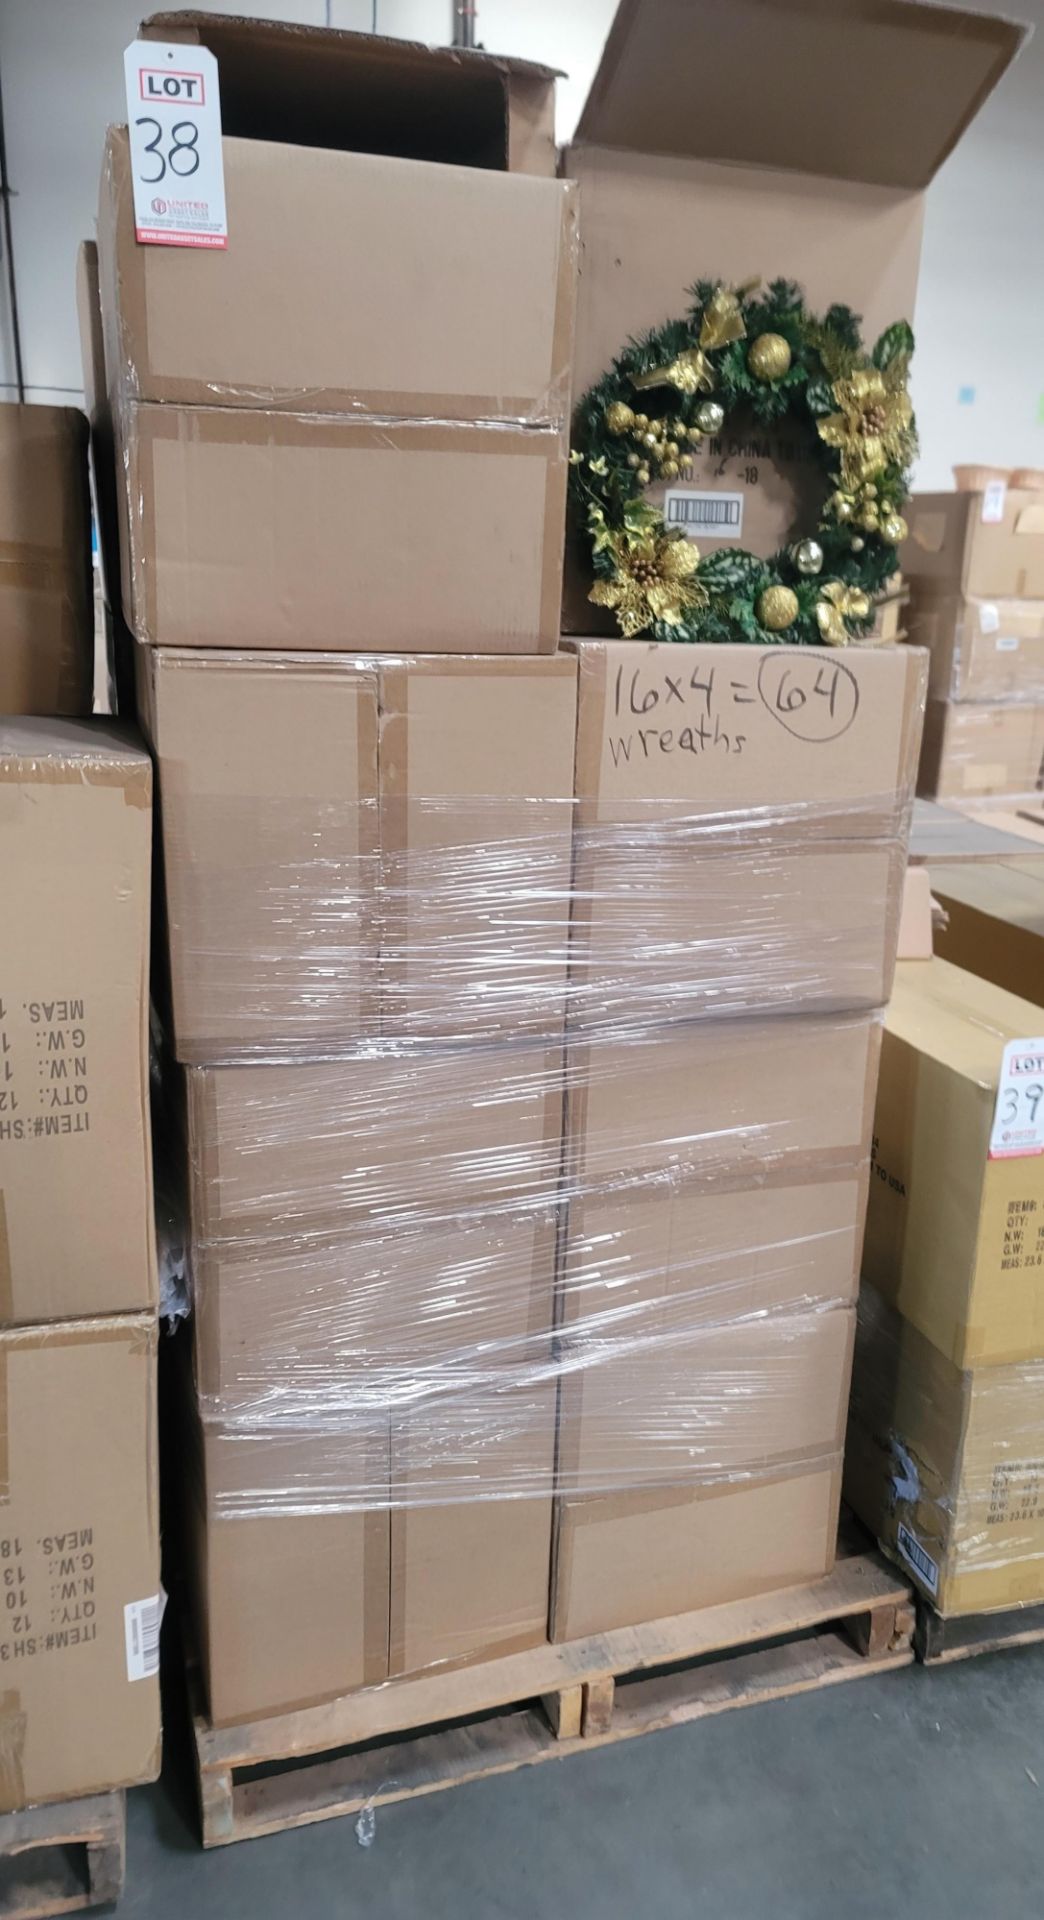 LOT - PALLET OF (64) 16" CHRISTMAS WREATH, (16 CASES/4 PER CASE) - Image 3 of 3